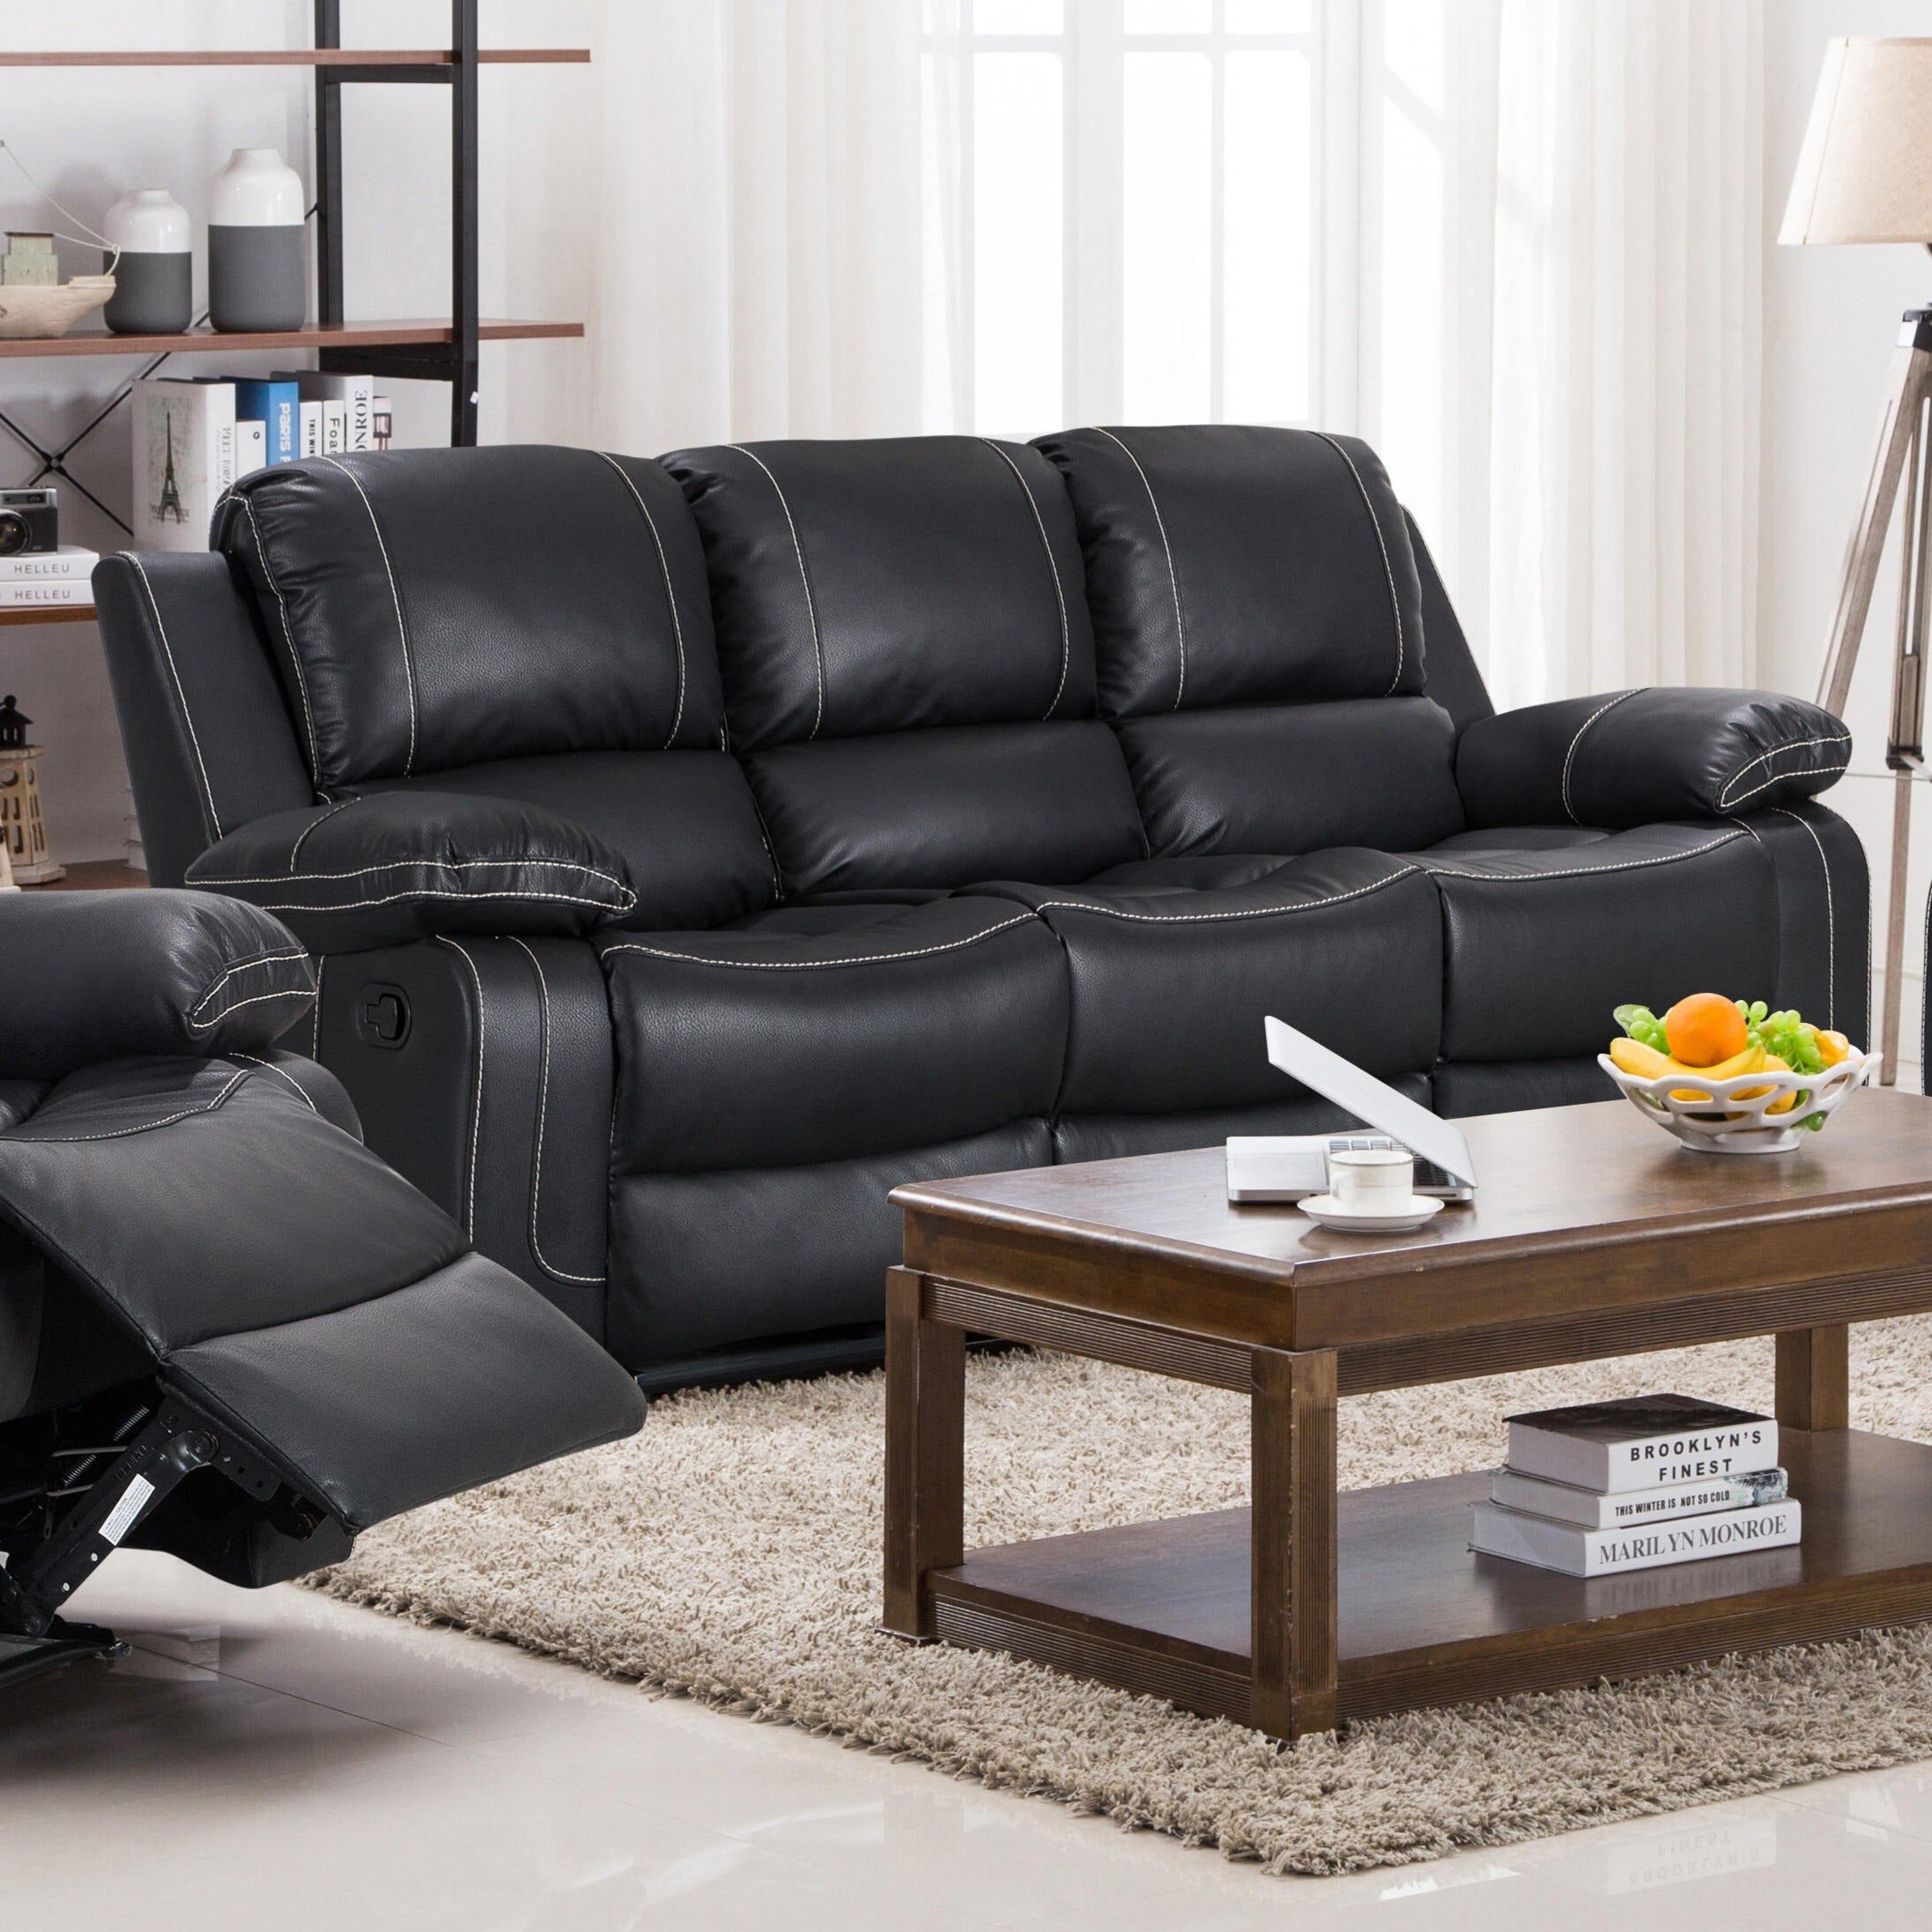 Stanhill 3 Seater Air Leather Recliner Lounge